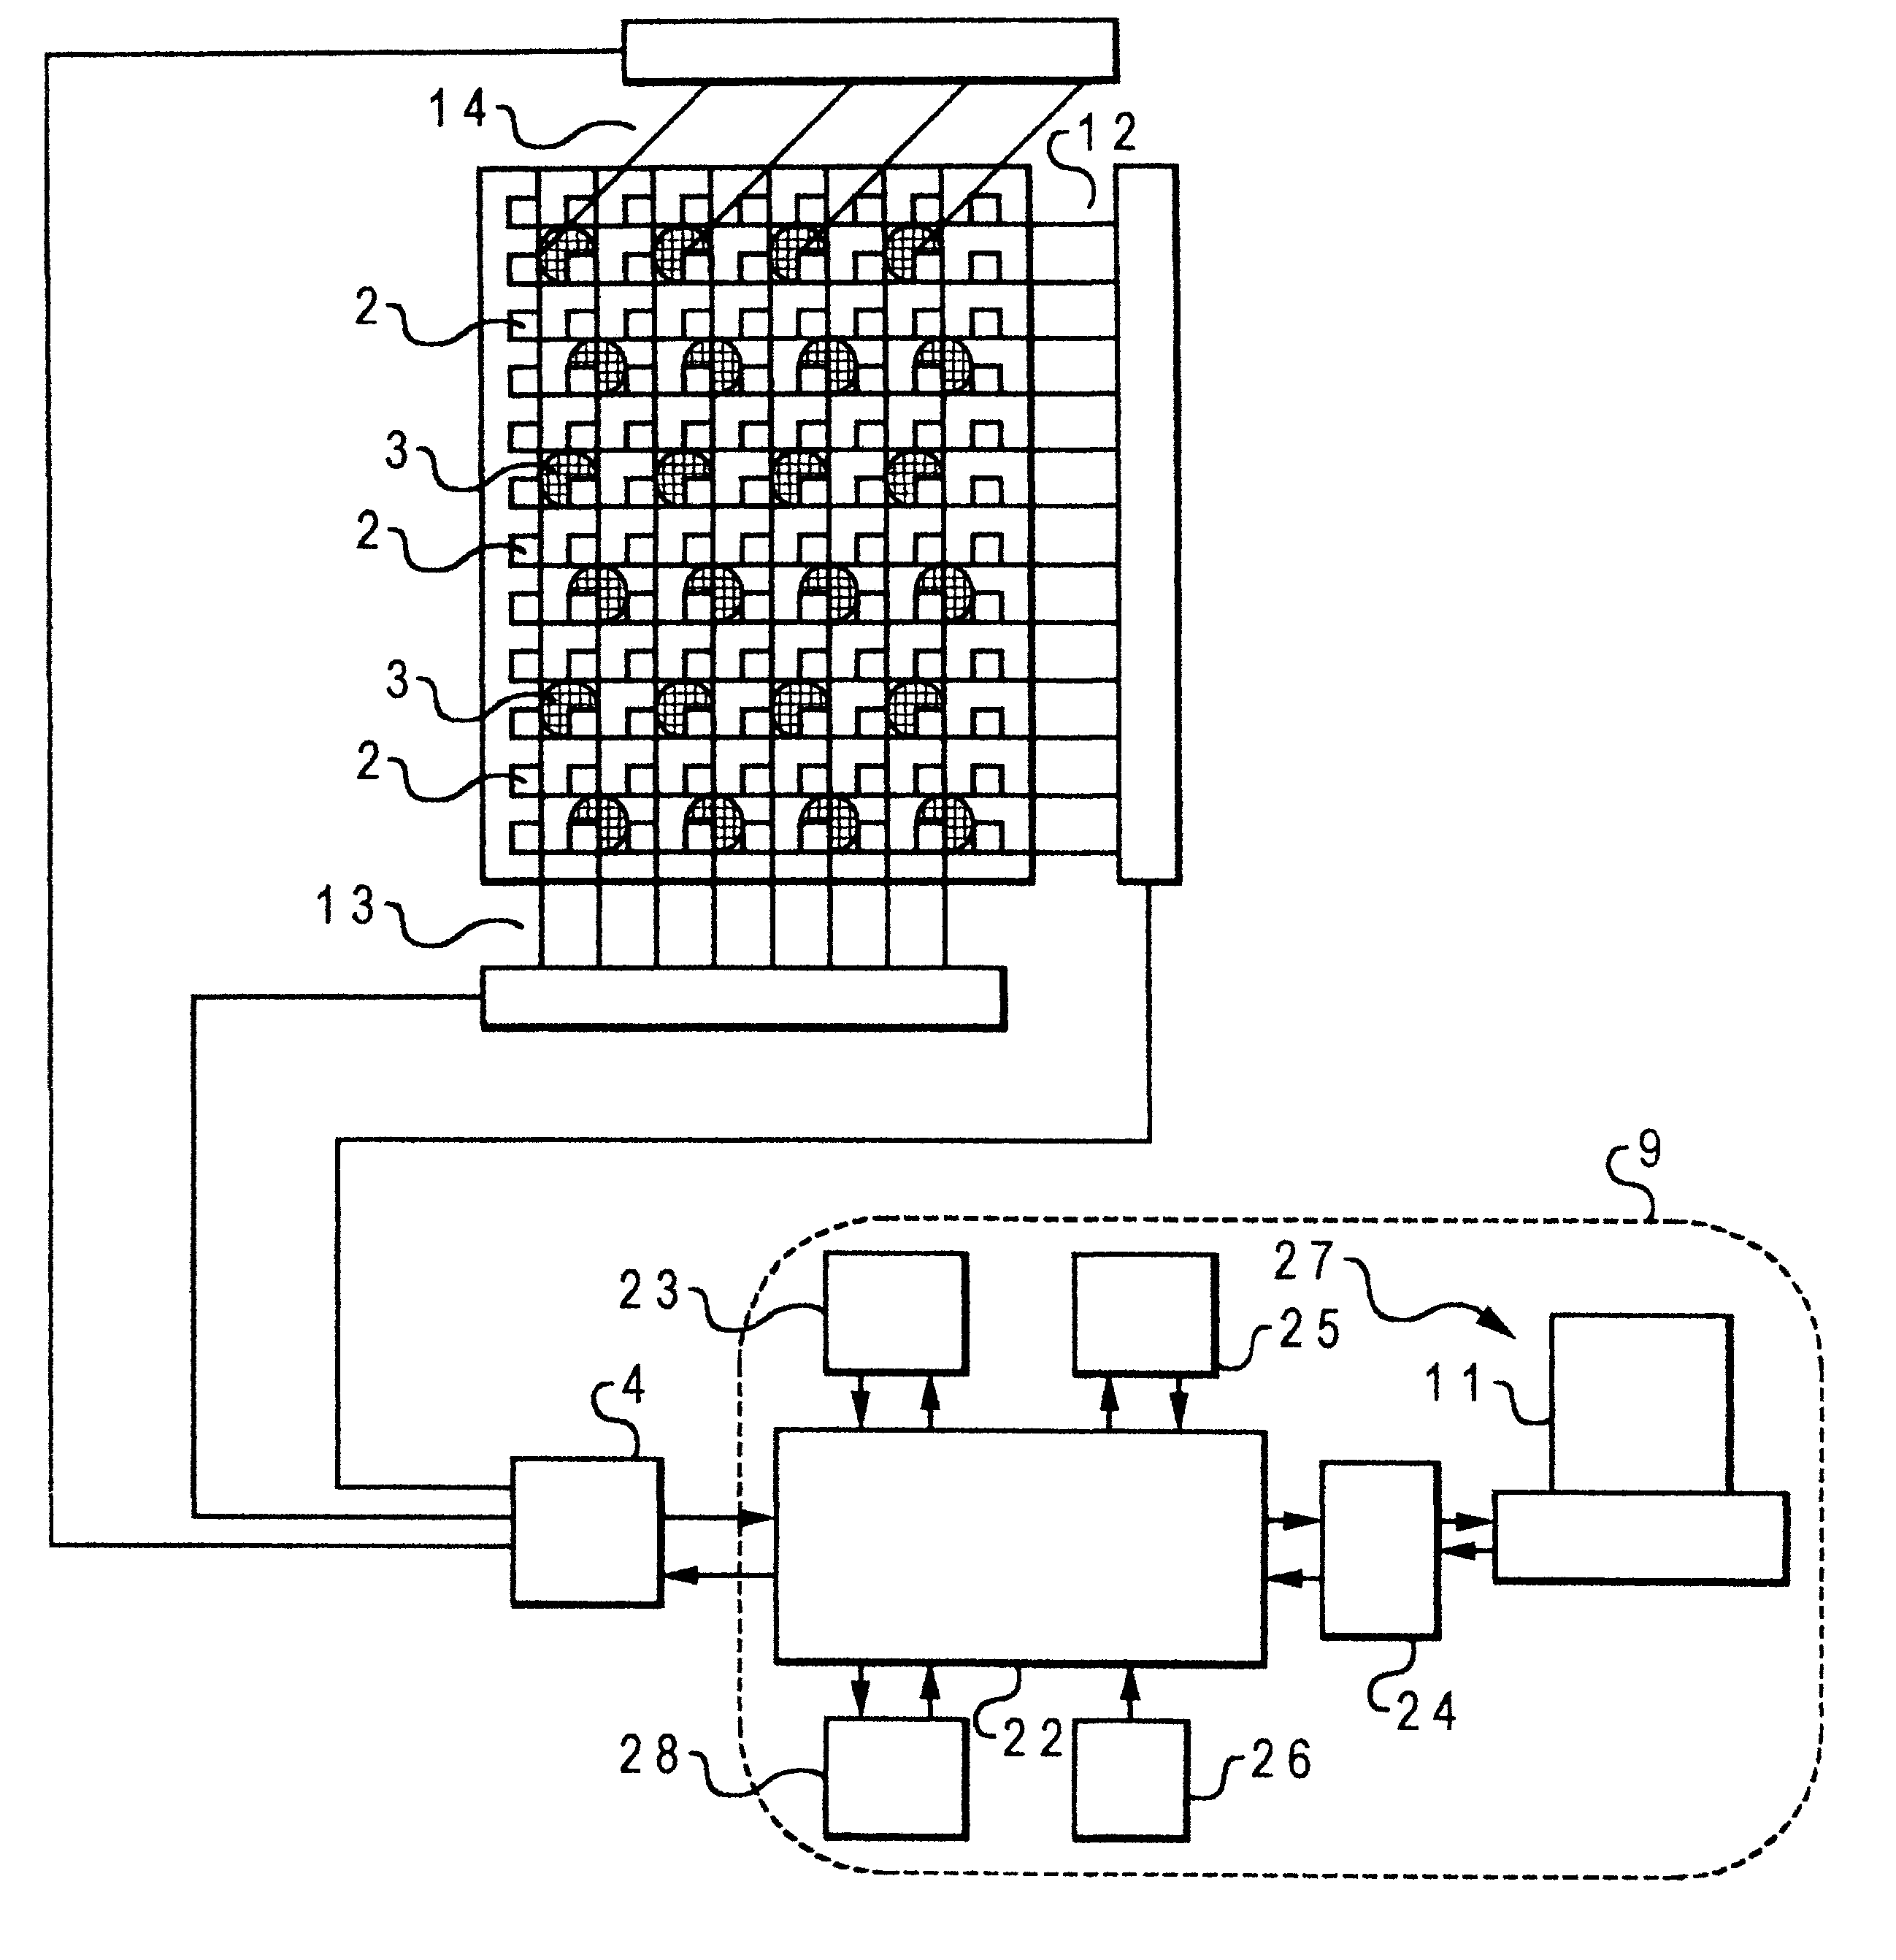 Apparatus and method for measuring the pressure distribution generated by a three-dimensional object